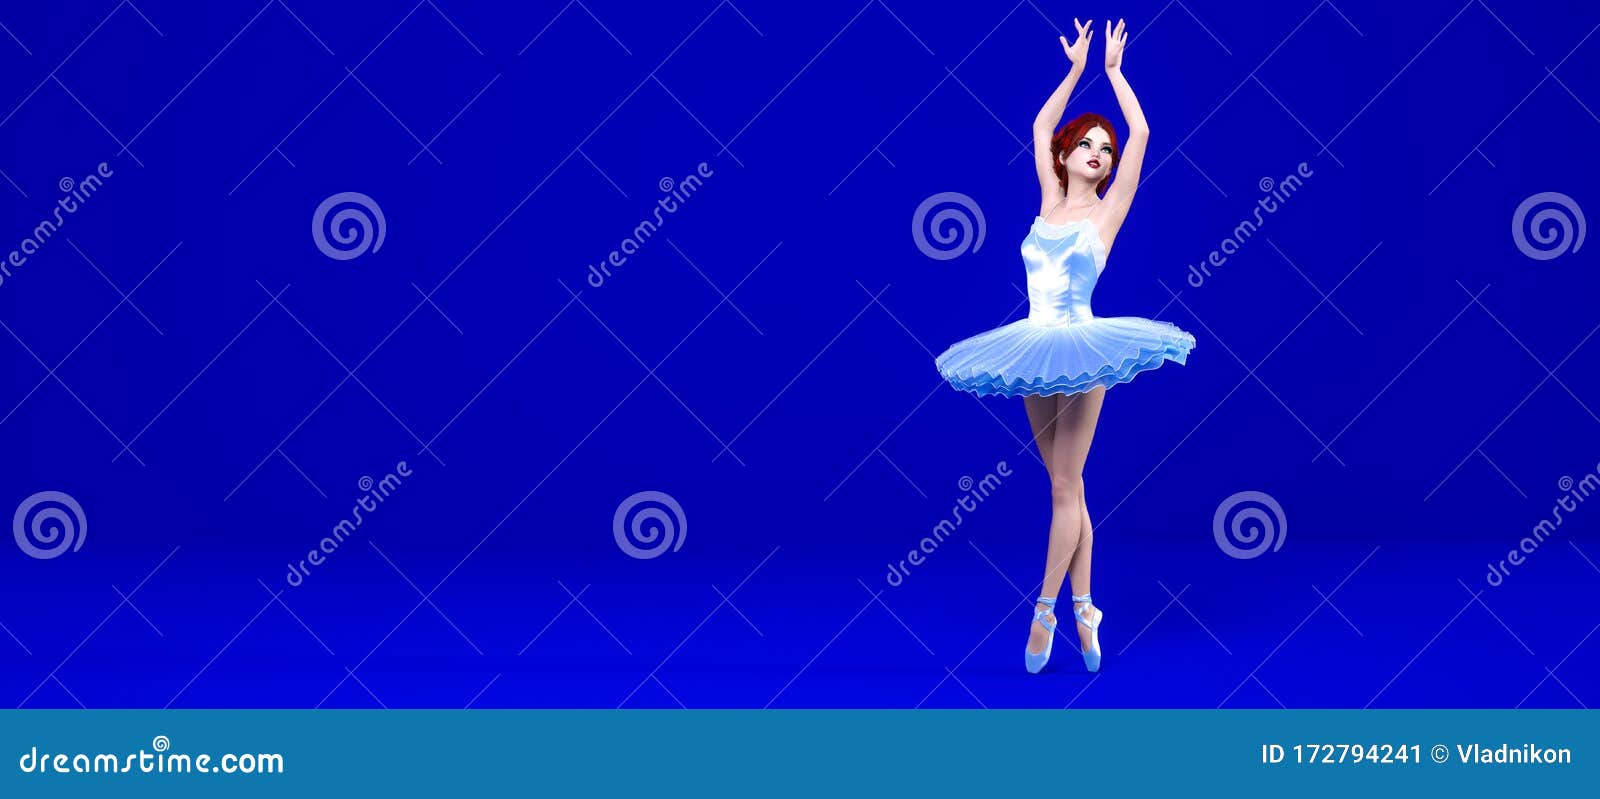 3D Ballerina Blue Classic Pointe Shoes and Ballet Tutu Stock ...